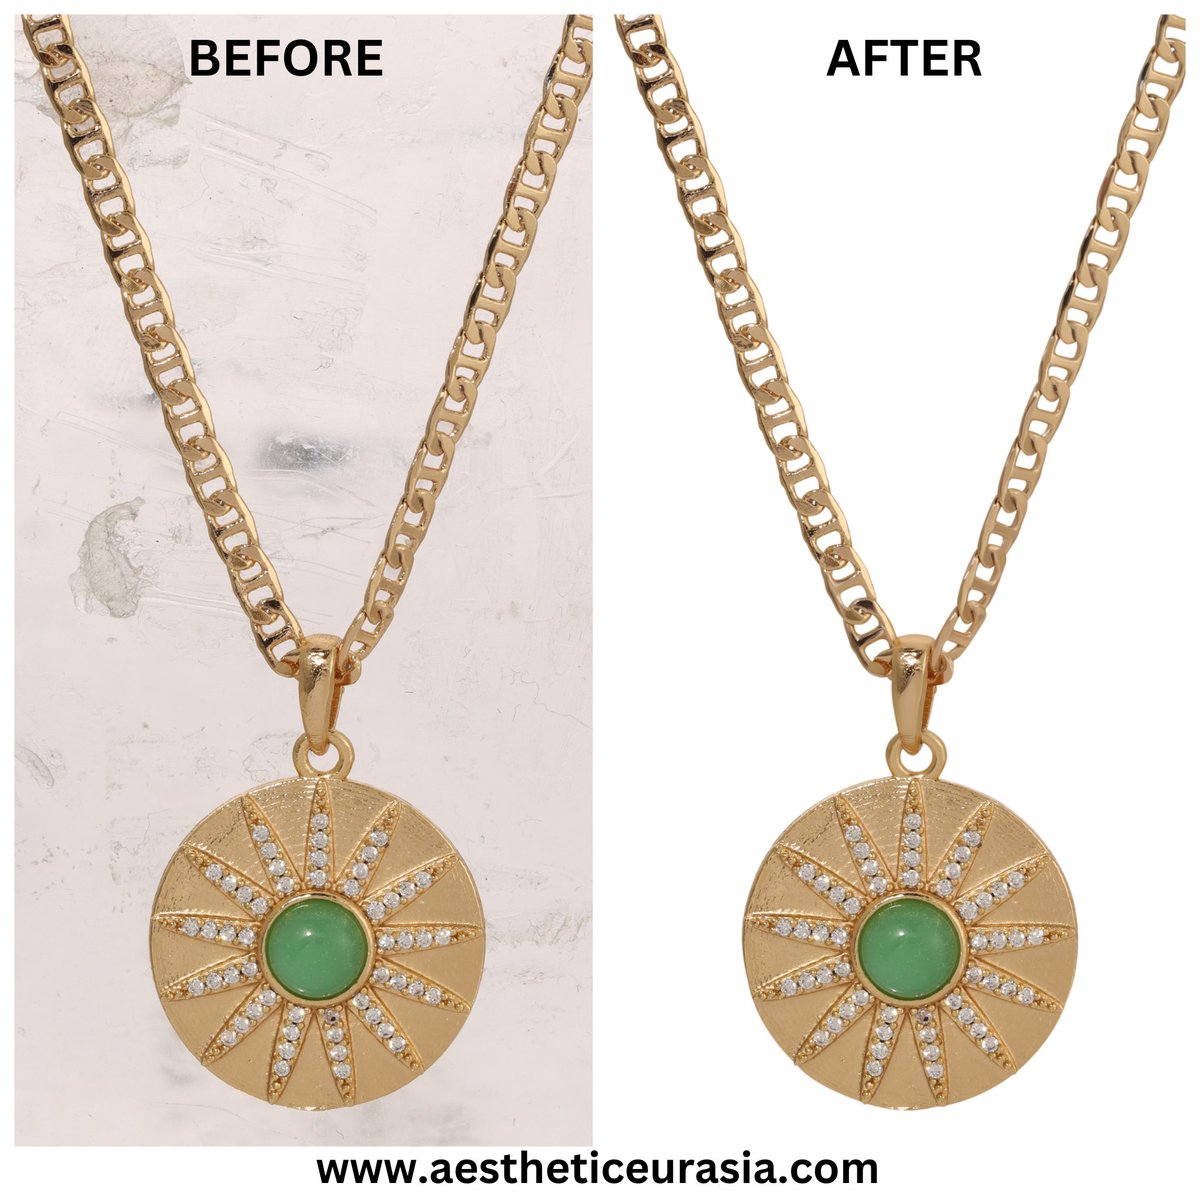 Are you tired of busy backgrounds stealing the spotlight from your exquisite jewelry pieces? 
#jewelryshoot #jewelryretouching #jewelryediting #jewelryenhancement #ccjewelryretouching #colorclipping #jewelryclippingpath #jewelryretouchingexperts
#clippingpath #imageediting